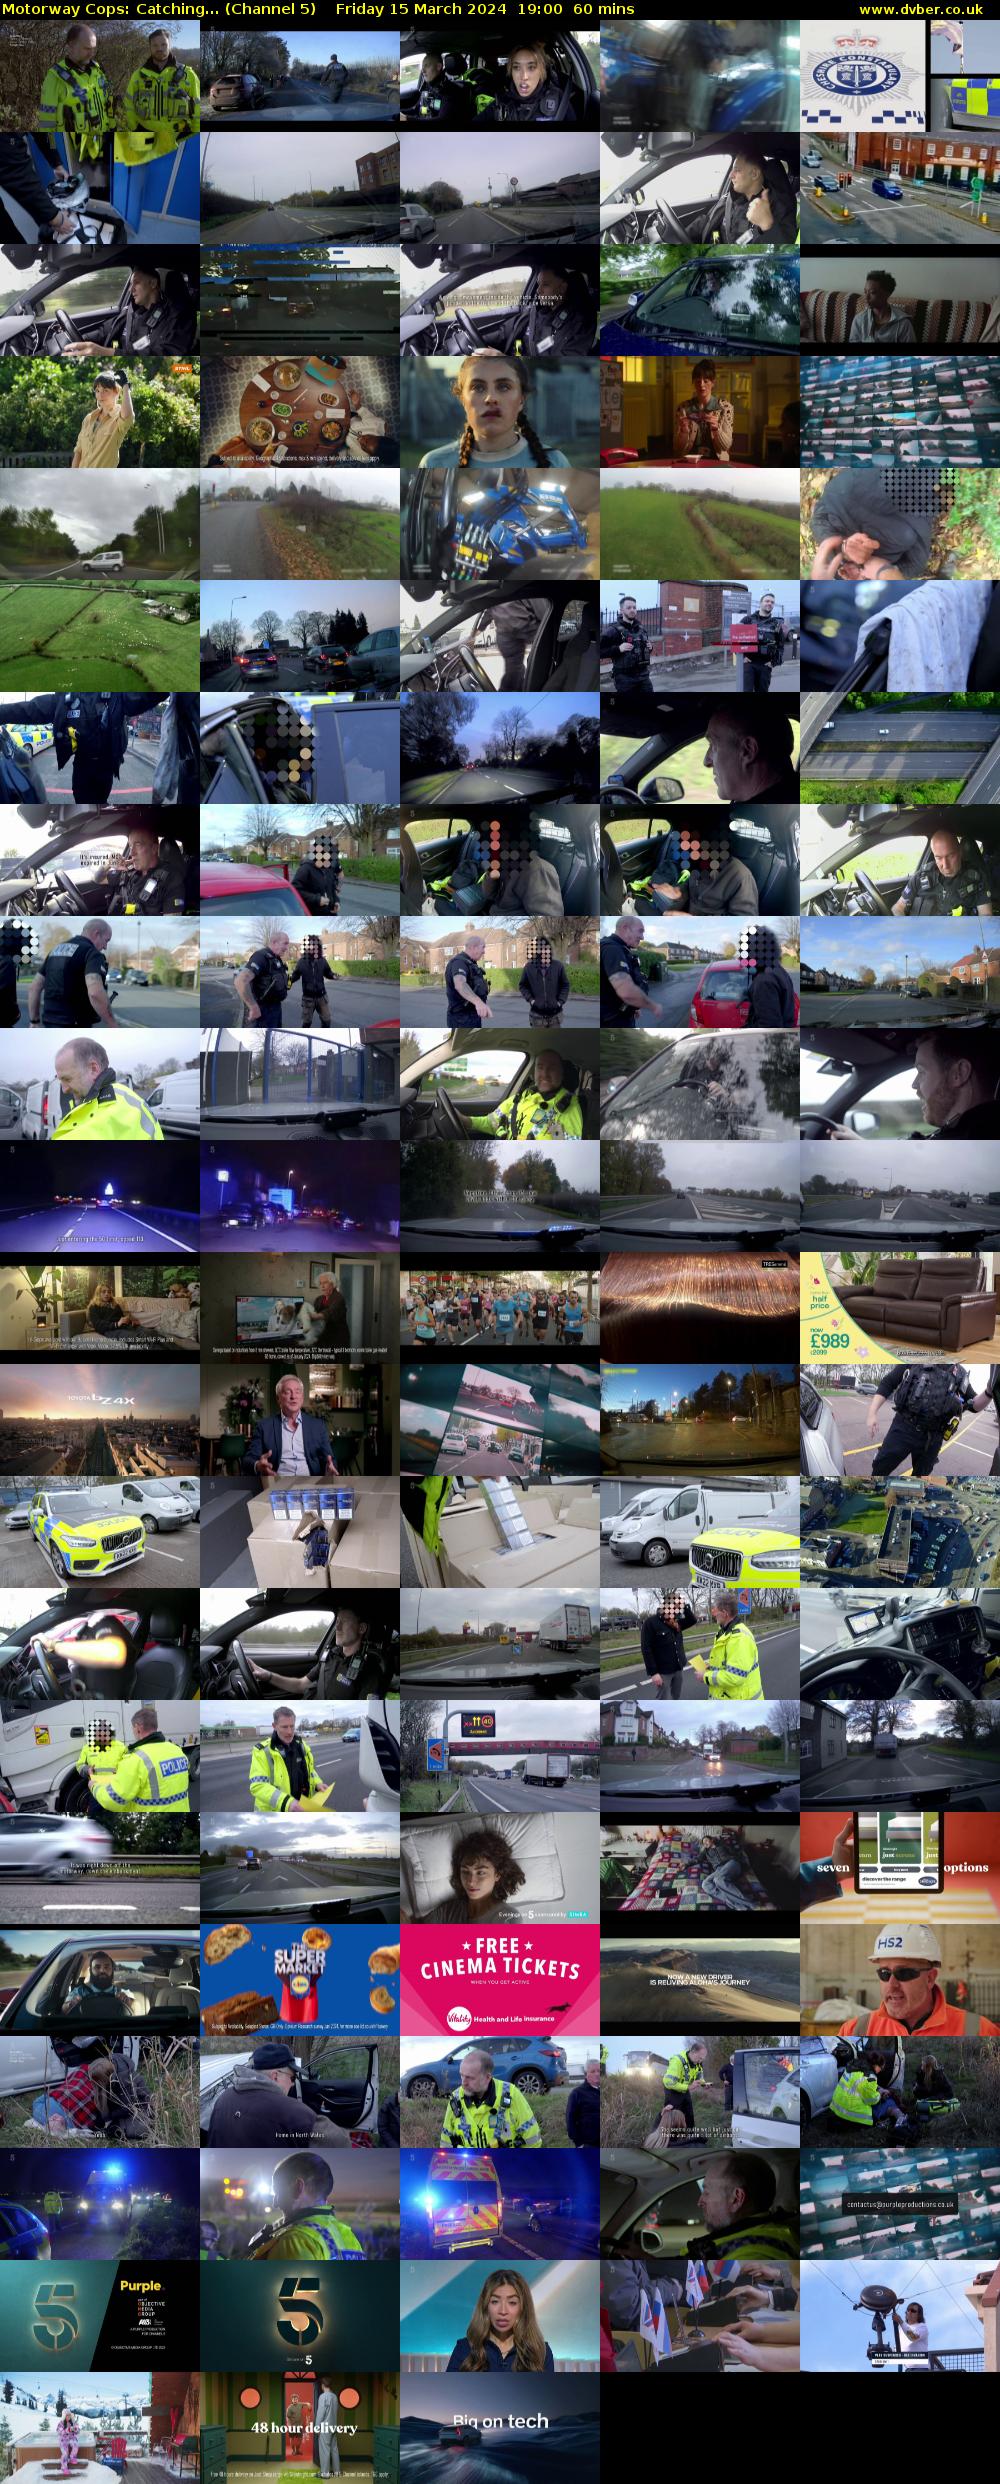 Motorway Cops: Catching... (Channel 5) Friday 15 March 2024 19:00 - 20:00